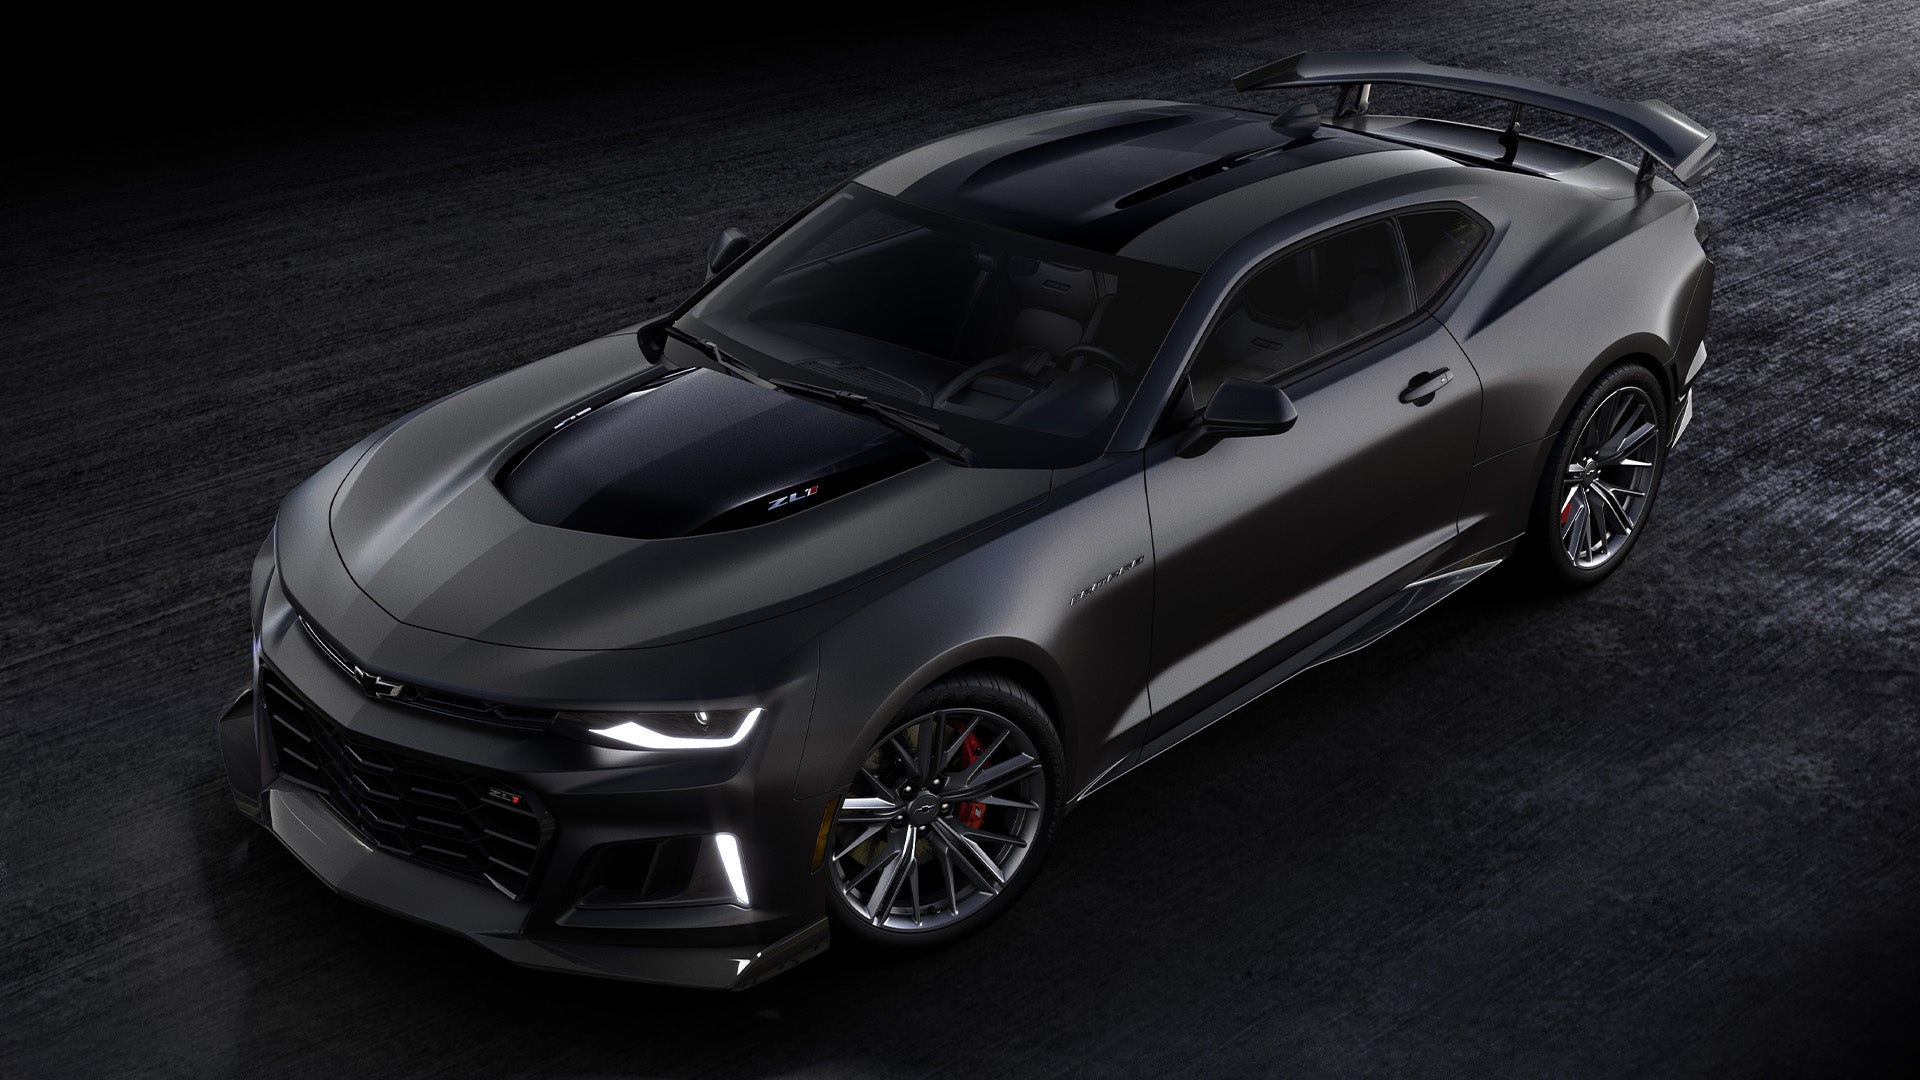 Production of the Chevy Camaro has officially come to an end.